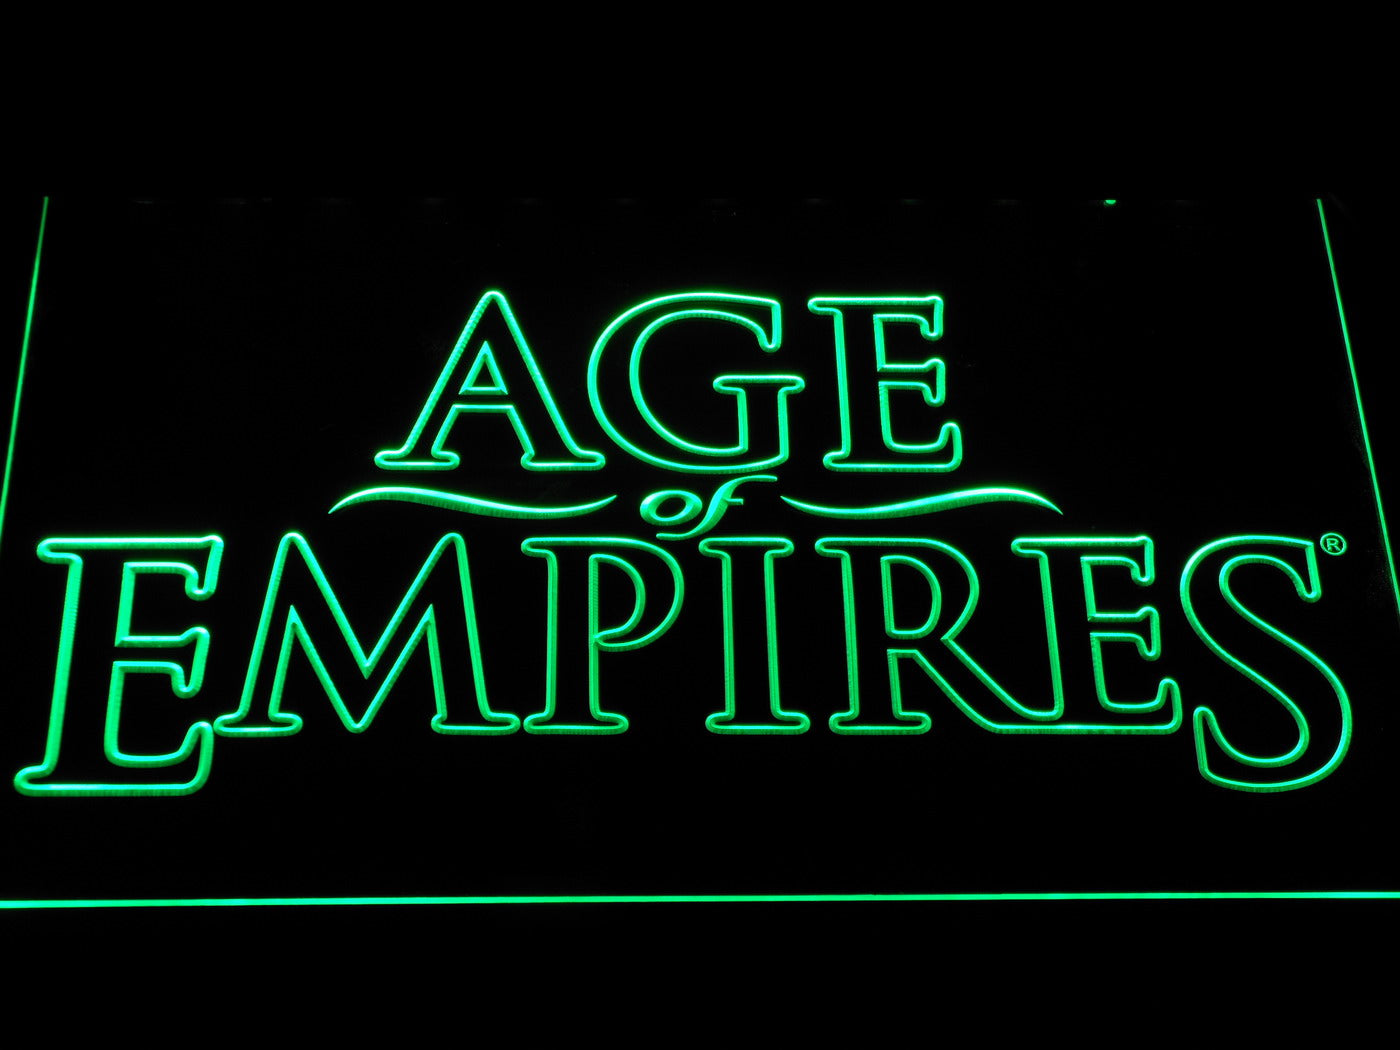 Age of Empires PC Games Neon Light LED Sign